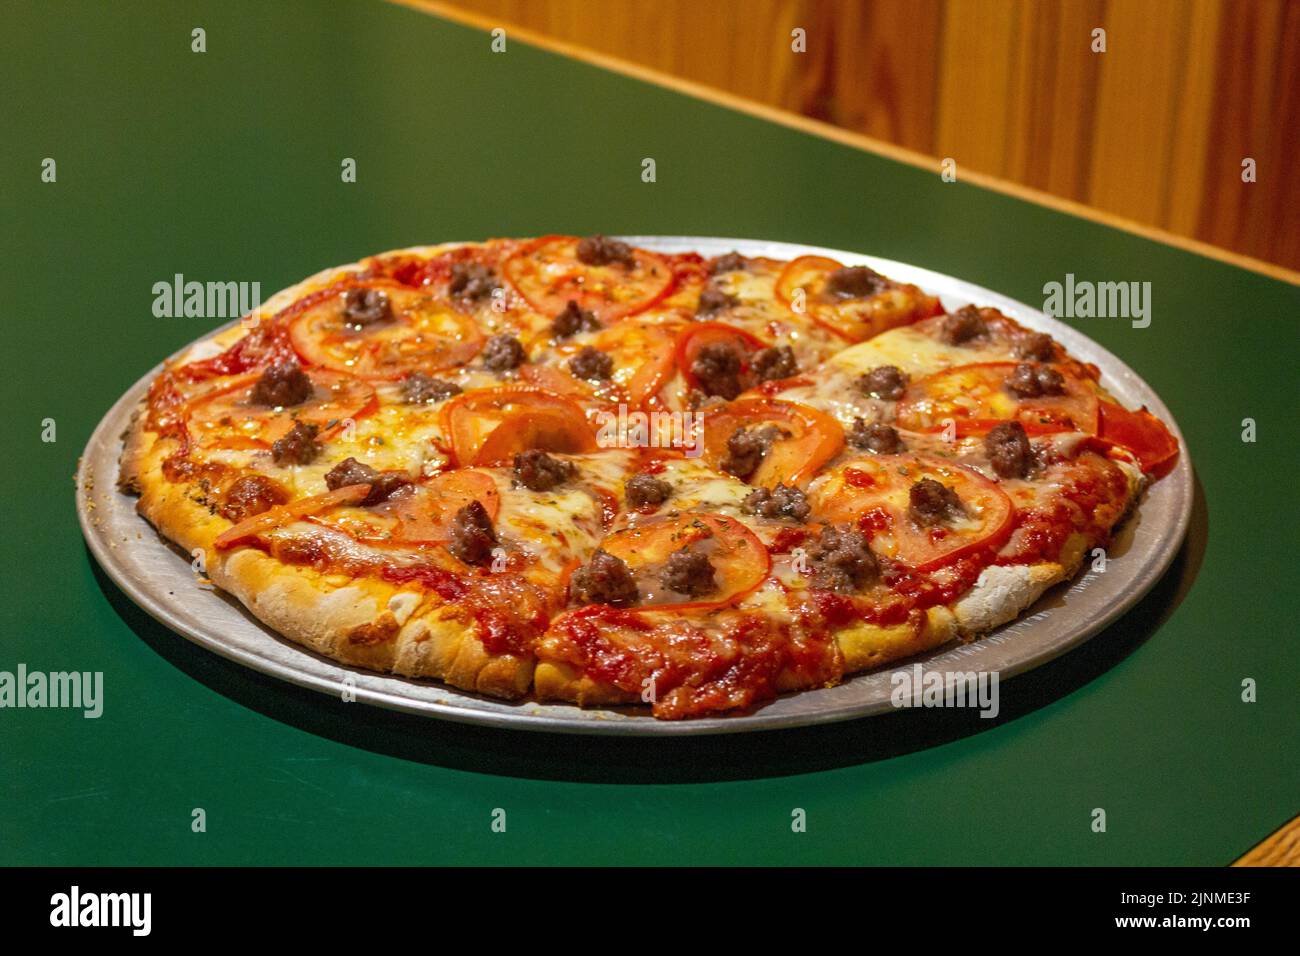 cheesy brick oven pizza with beef and tomatoes Stock Photo